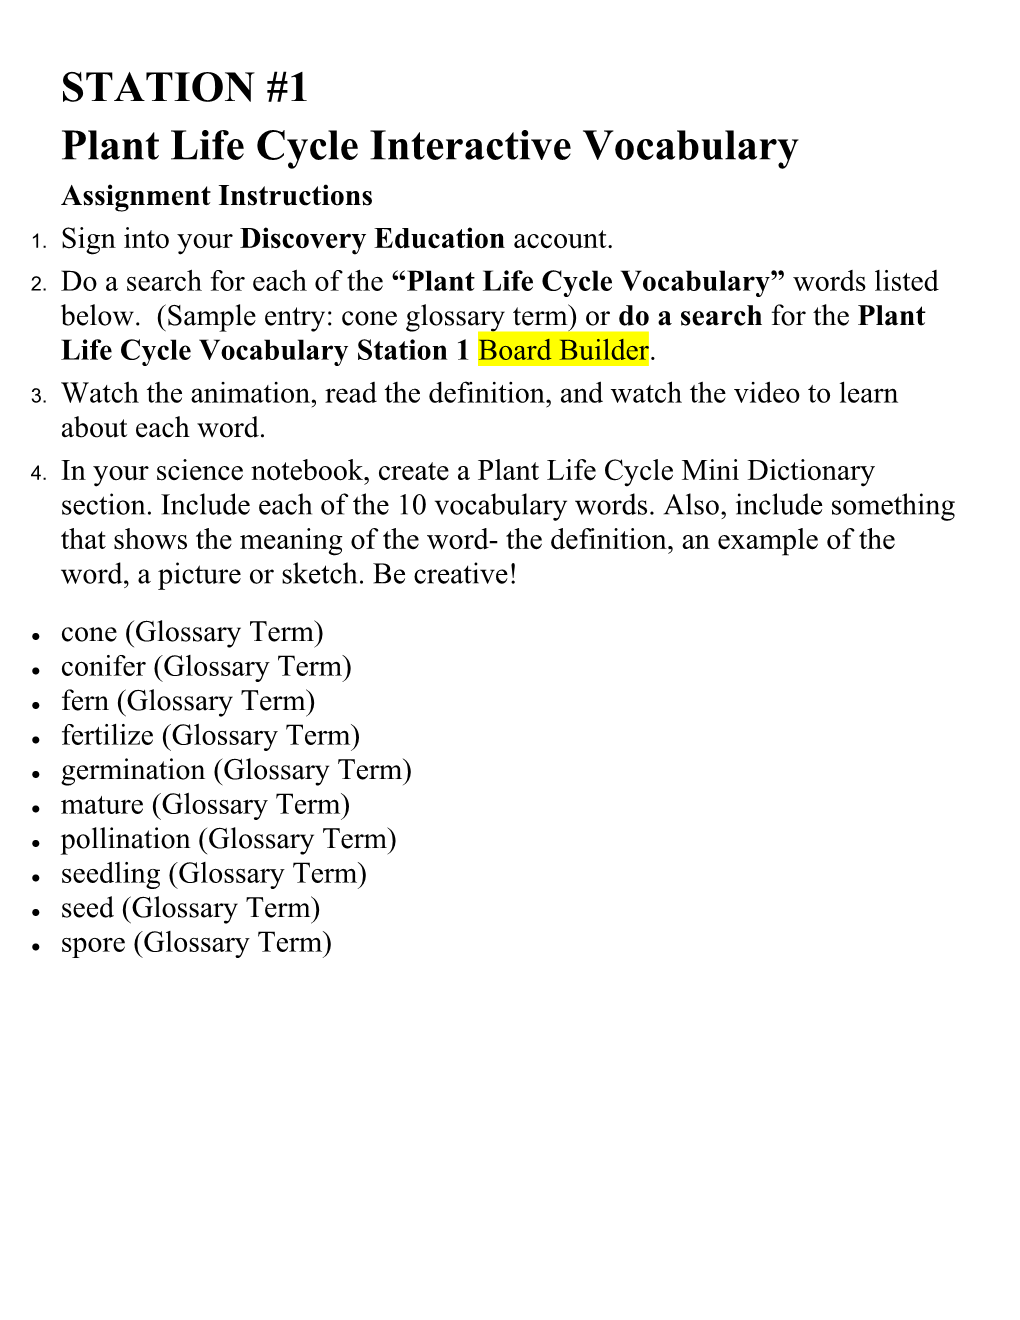 Plant Life Cycle Interactive Vocabulary